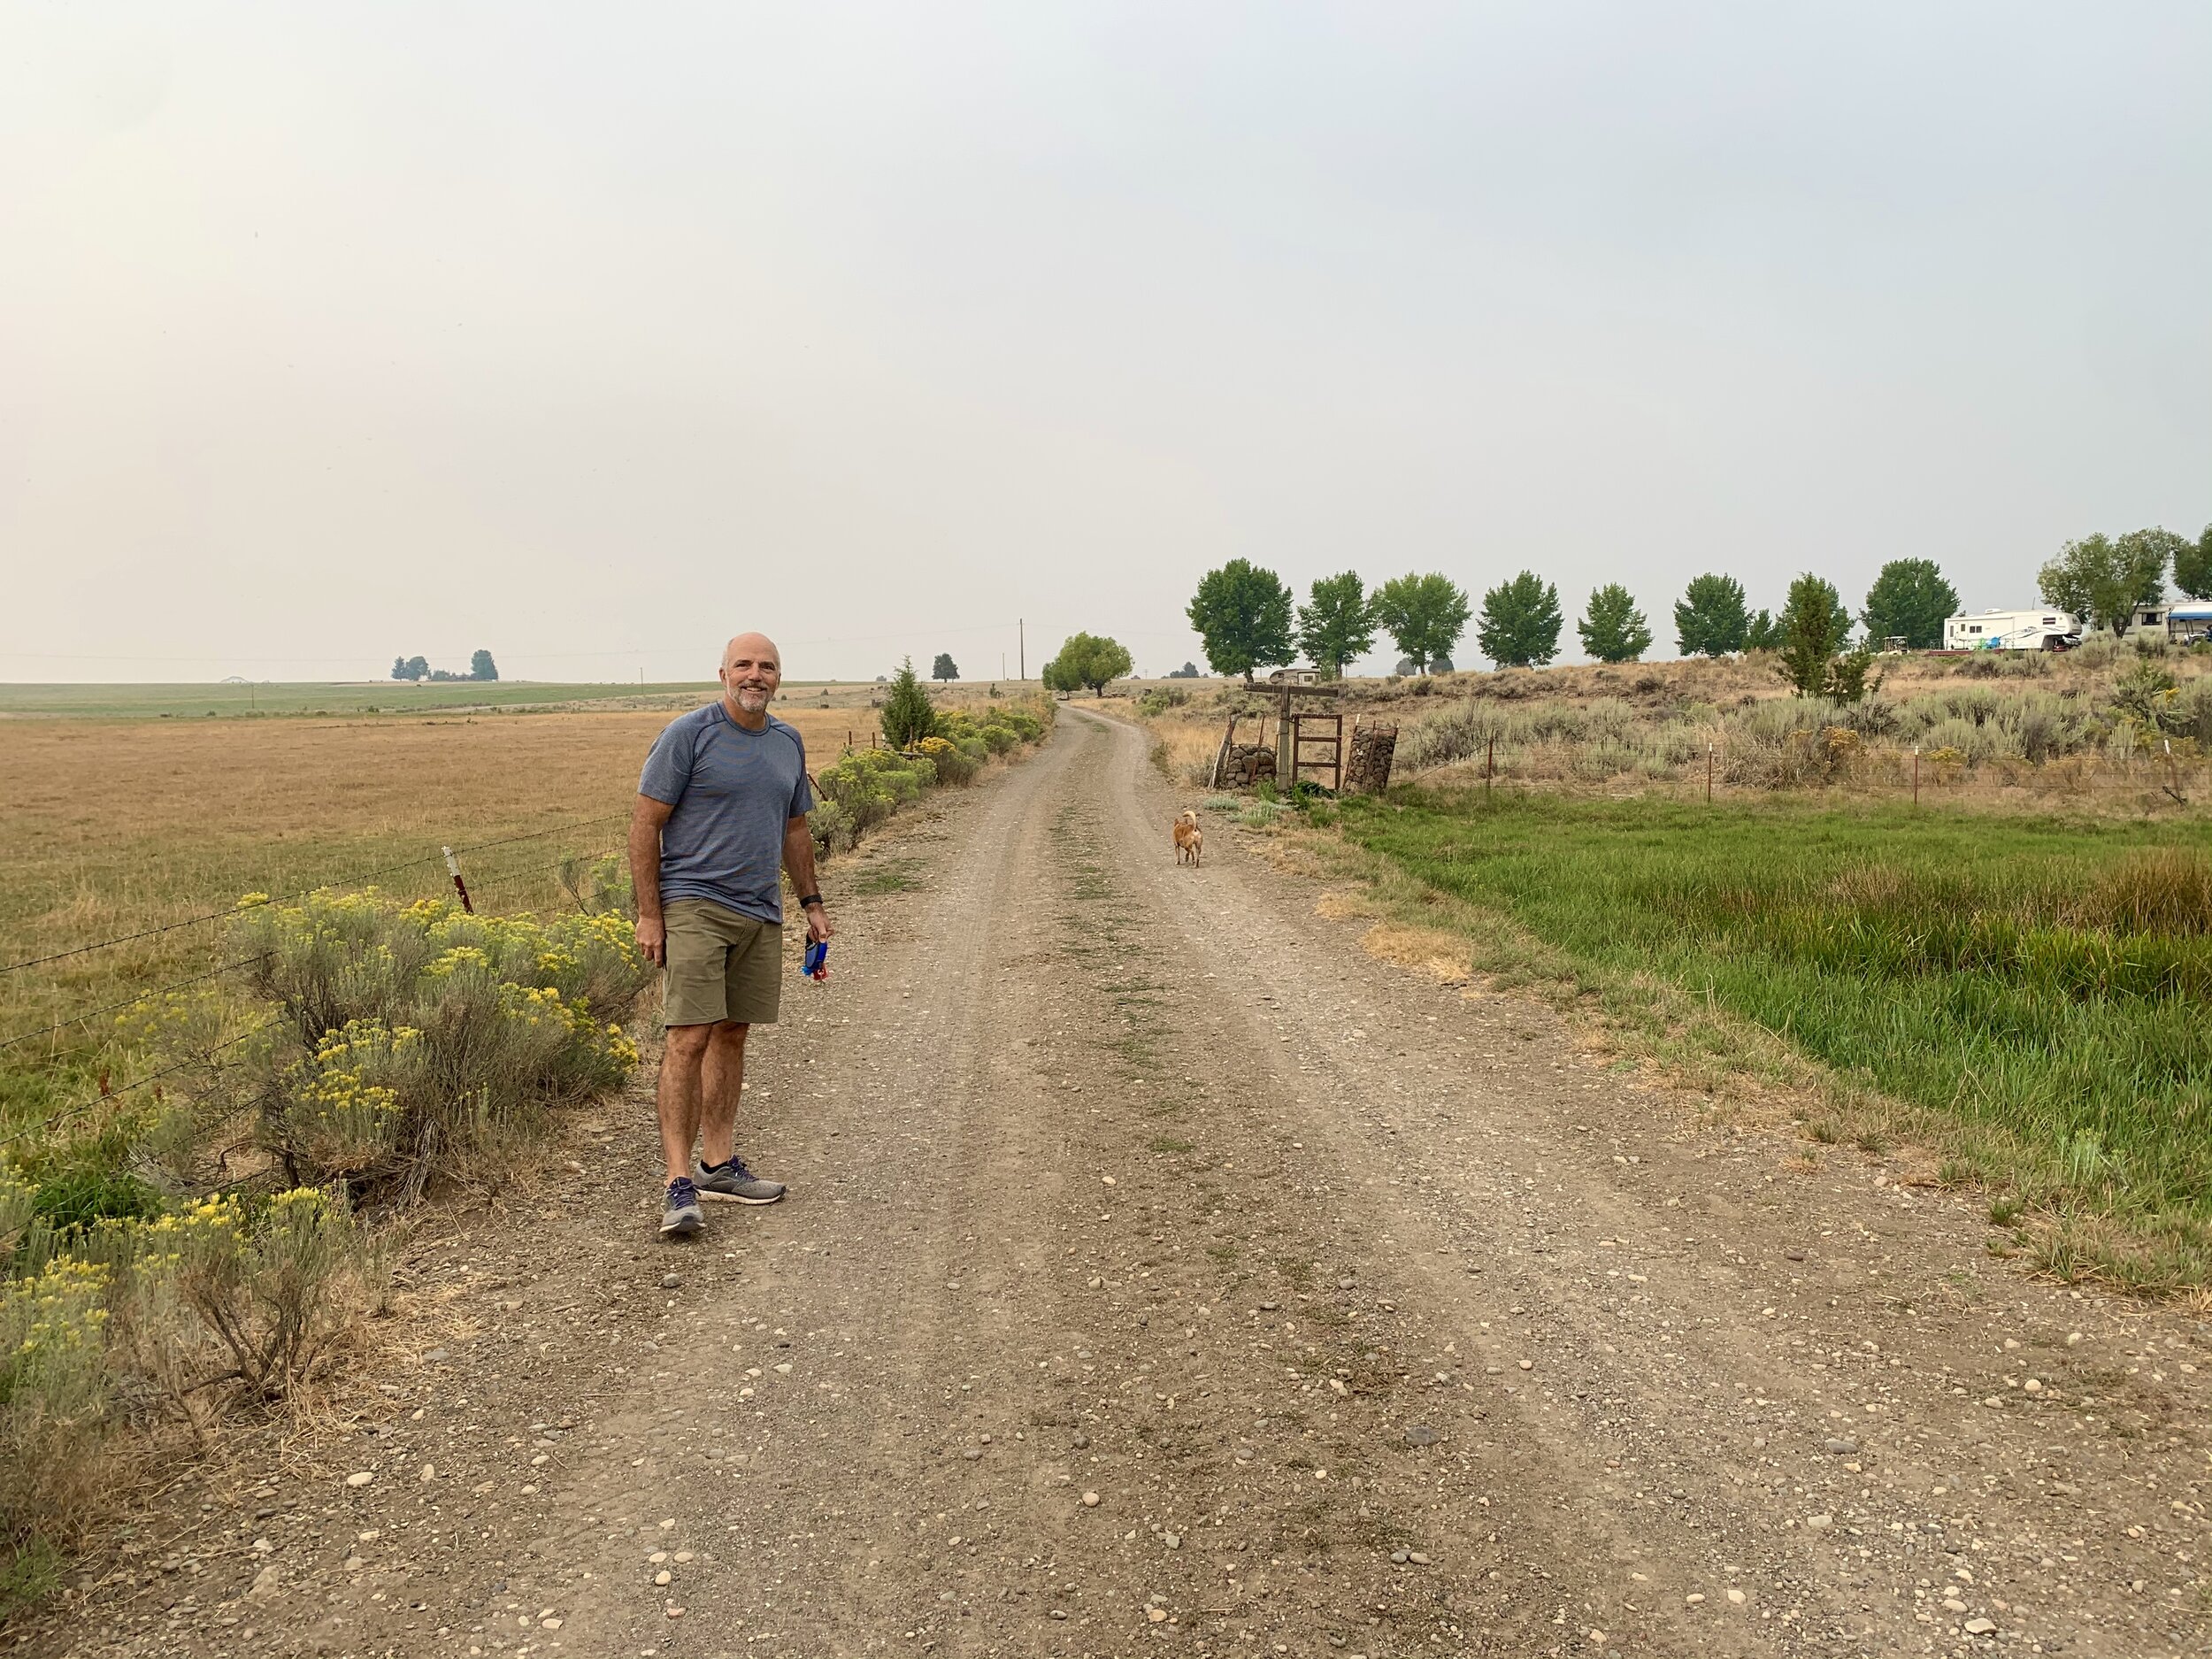  In  Lakeview, Oregon,  we stayed at a remote RV park in the desert. It was still a little smoky here, but a lovely place. They told us we were welcomed to roam anywhere on the 5,000-acre property. We enjoyed a morning walk before the last leg of the